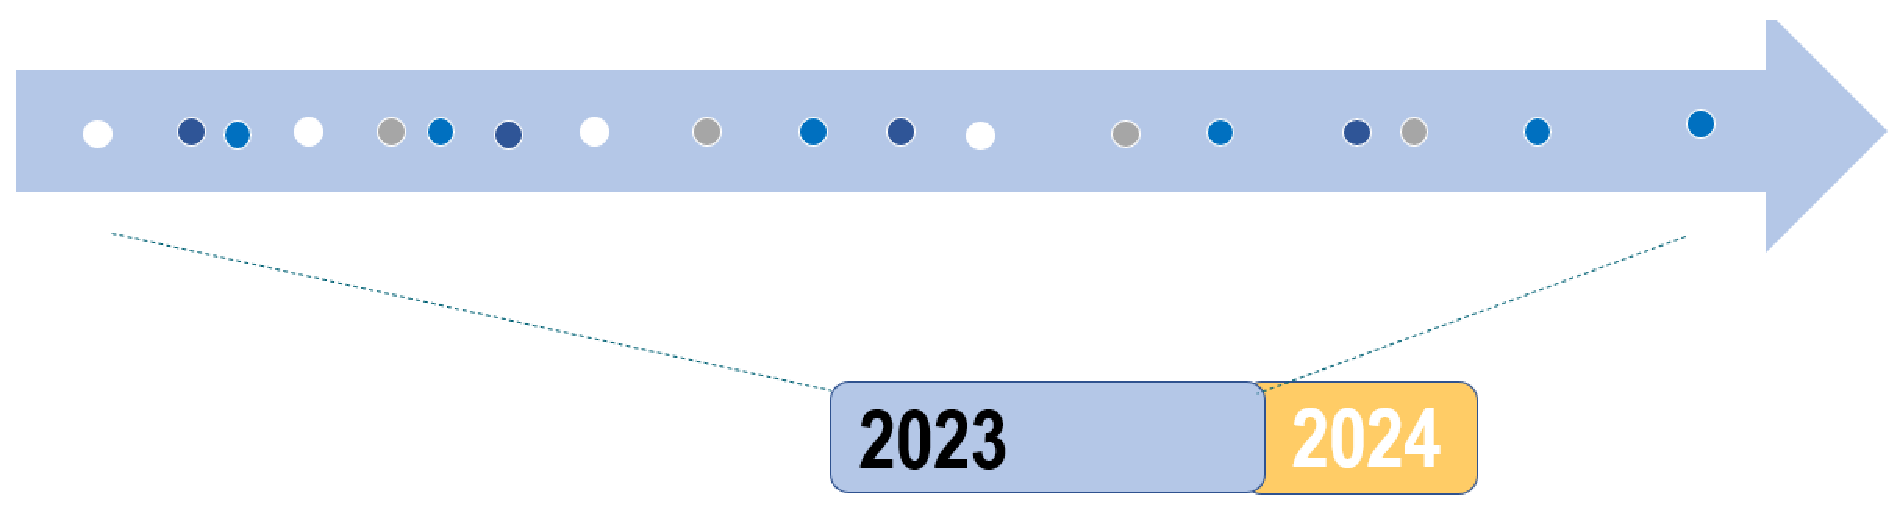 2023 WIT replacement project timeline